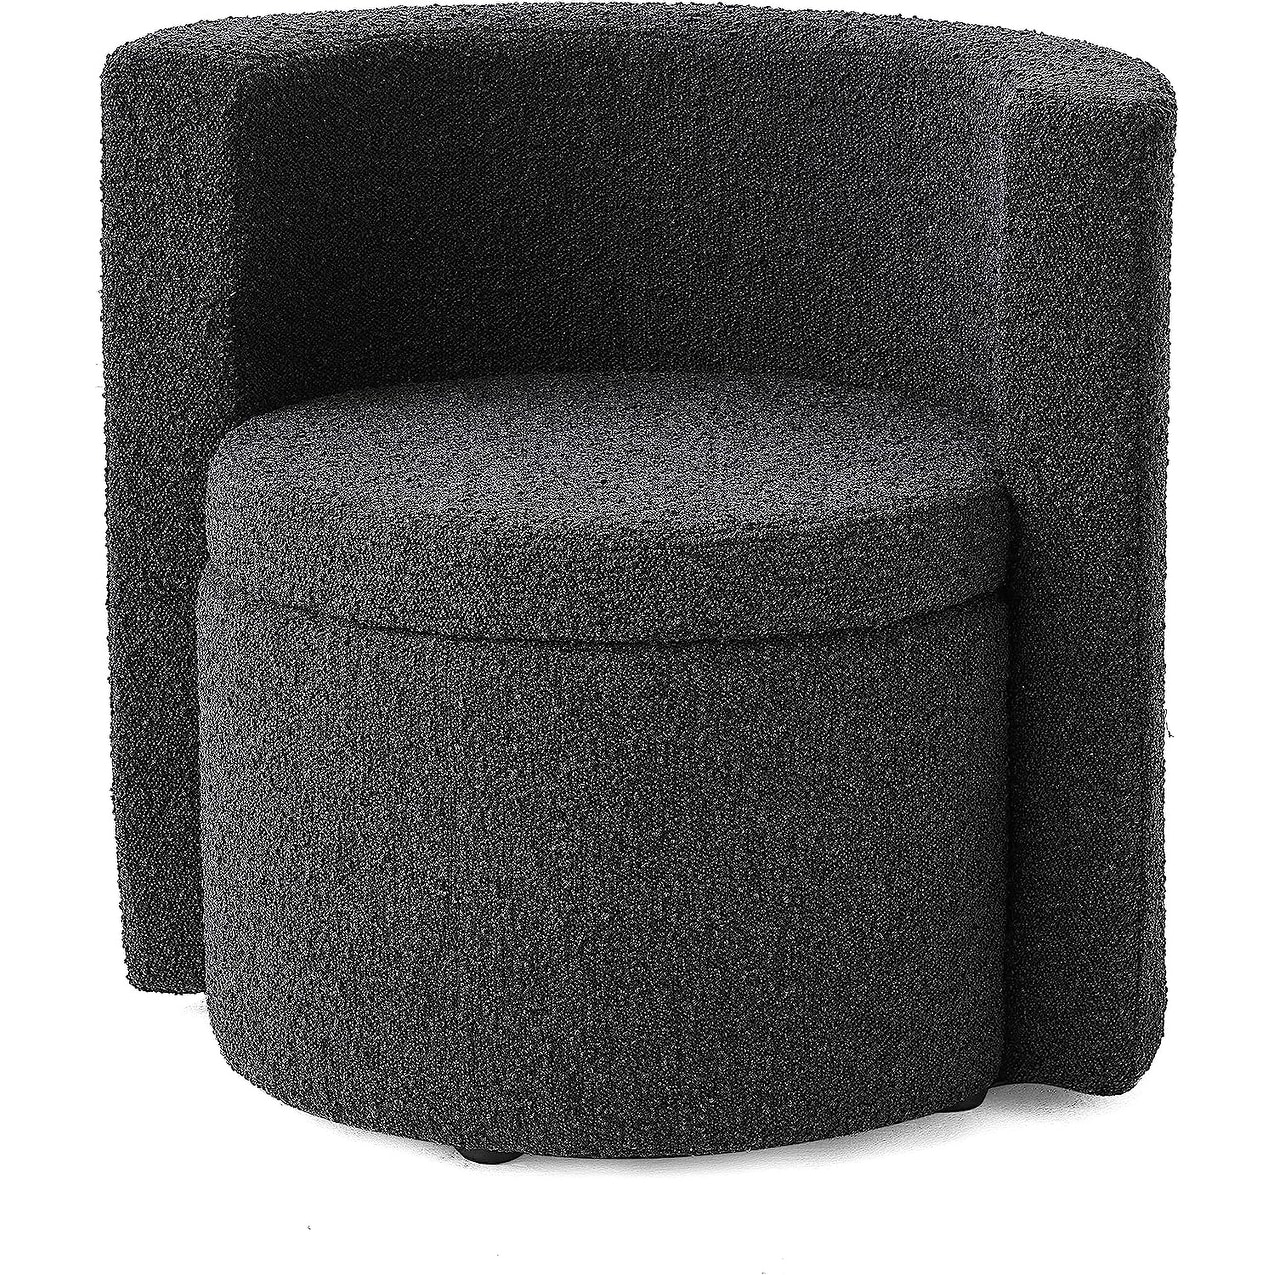 2East - Comfort Cushion Seat - With Storage - Mixed